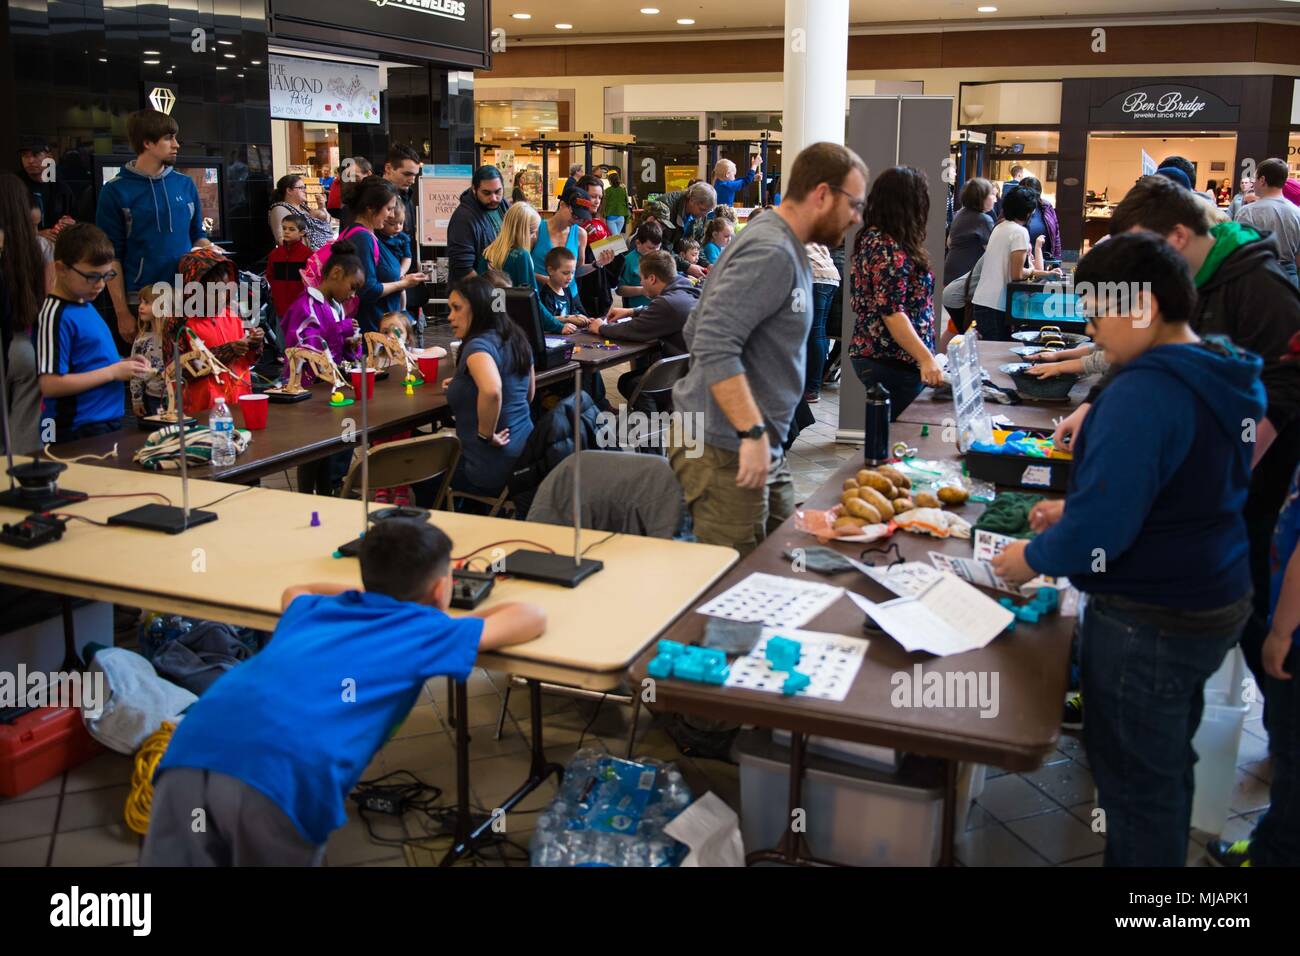 180428-N-SH284-0096 SILVERDALE, Wash., (April 28, 2018) Shipyard workers for the Puget Sound Naval Shipyard and Intermediate Maintenance Facility engage with children during the 5th Annual West Sound STEM Showcase at the Kitsap Mall. The showcase presents science, technology, engineering and math principles at a fun, interactive event hosted by dozens of area organizations showcasing hands-on activities to engage youth of all ages. Hits have included a catapult challenge, underwater vehicle exploration, robotics, rocket launches, bridge building, field medicine, egg drops, animals, circuitry,  Stock Photo